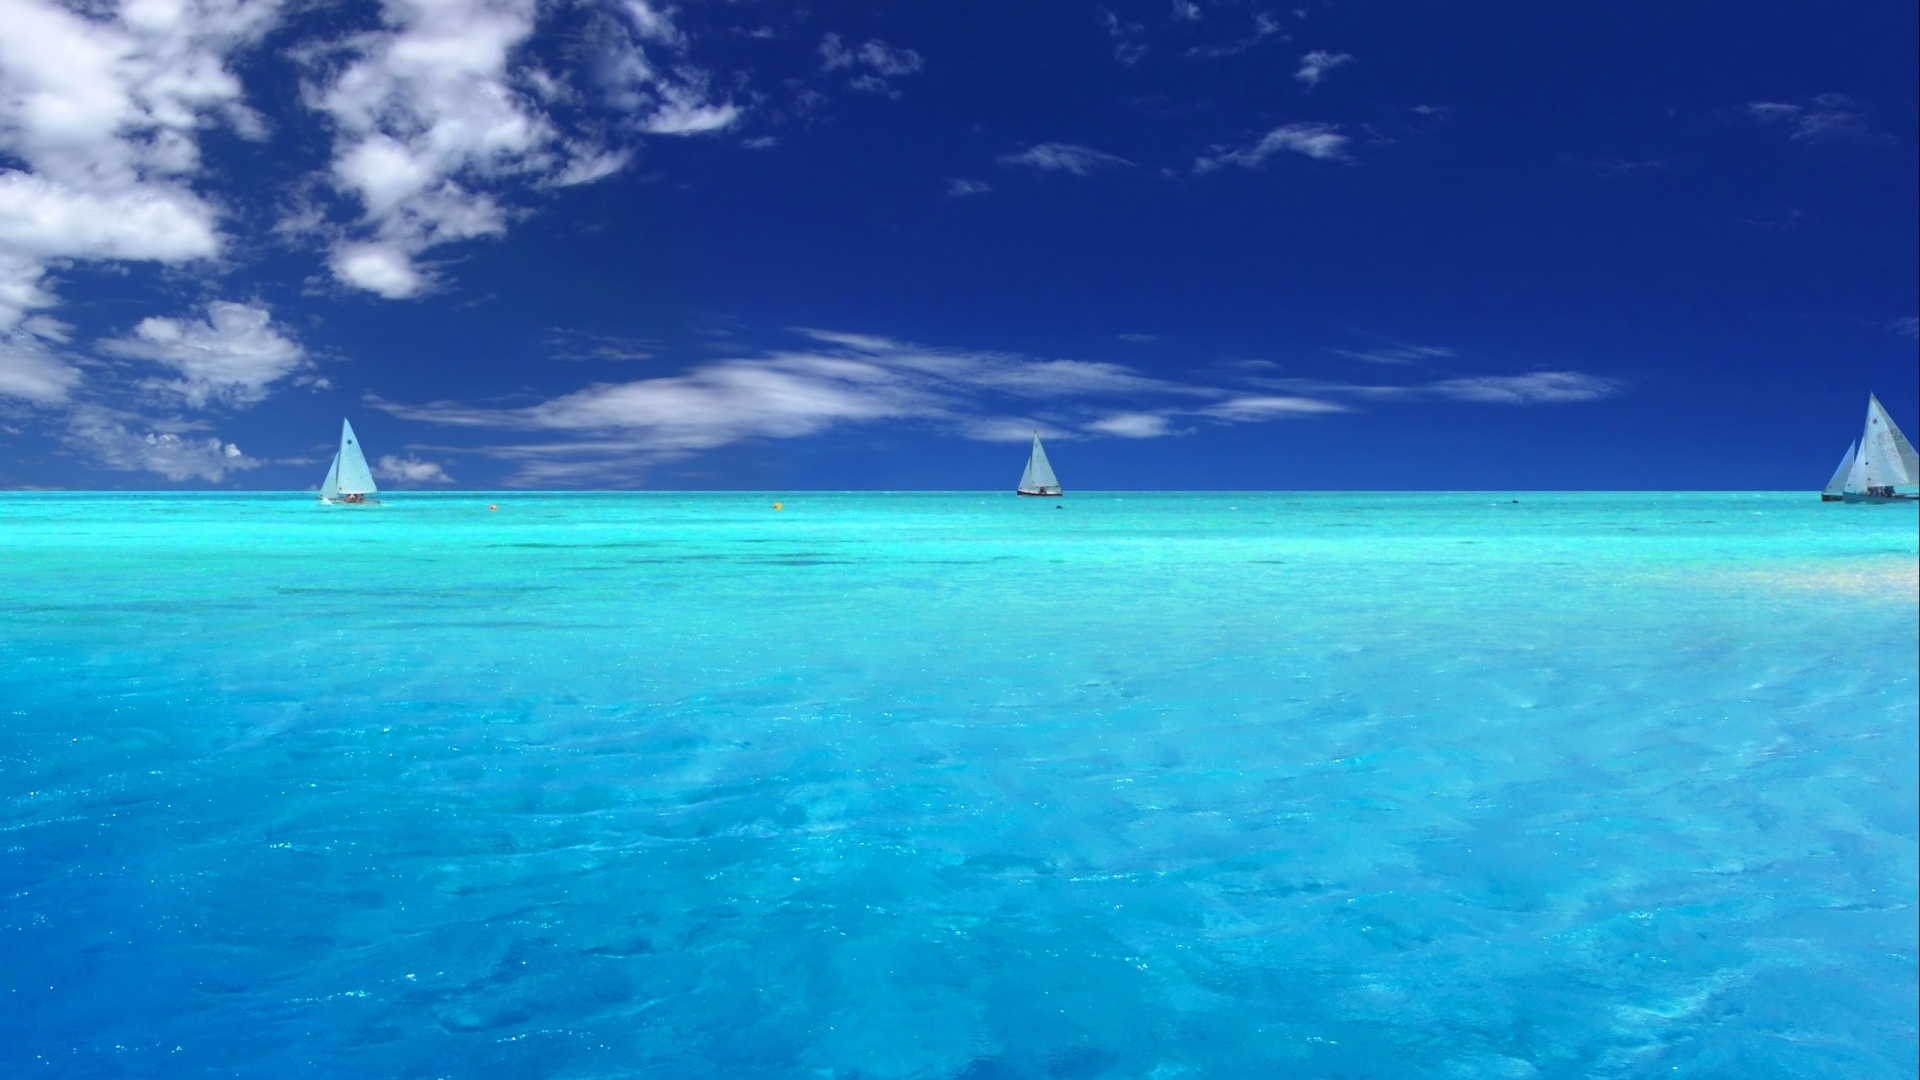 Blue Paradise for 1920 x 1080 HDTV 1080p resolution